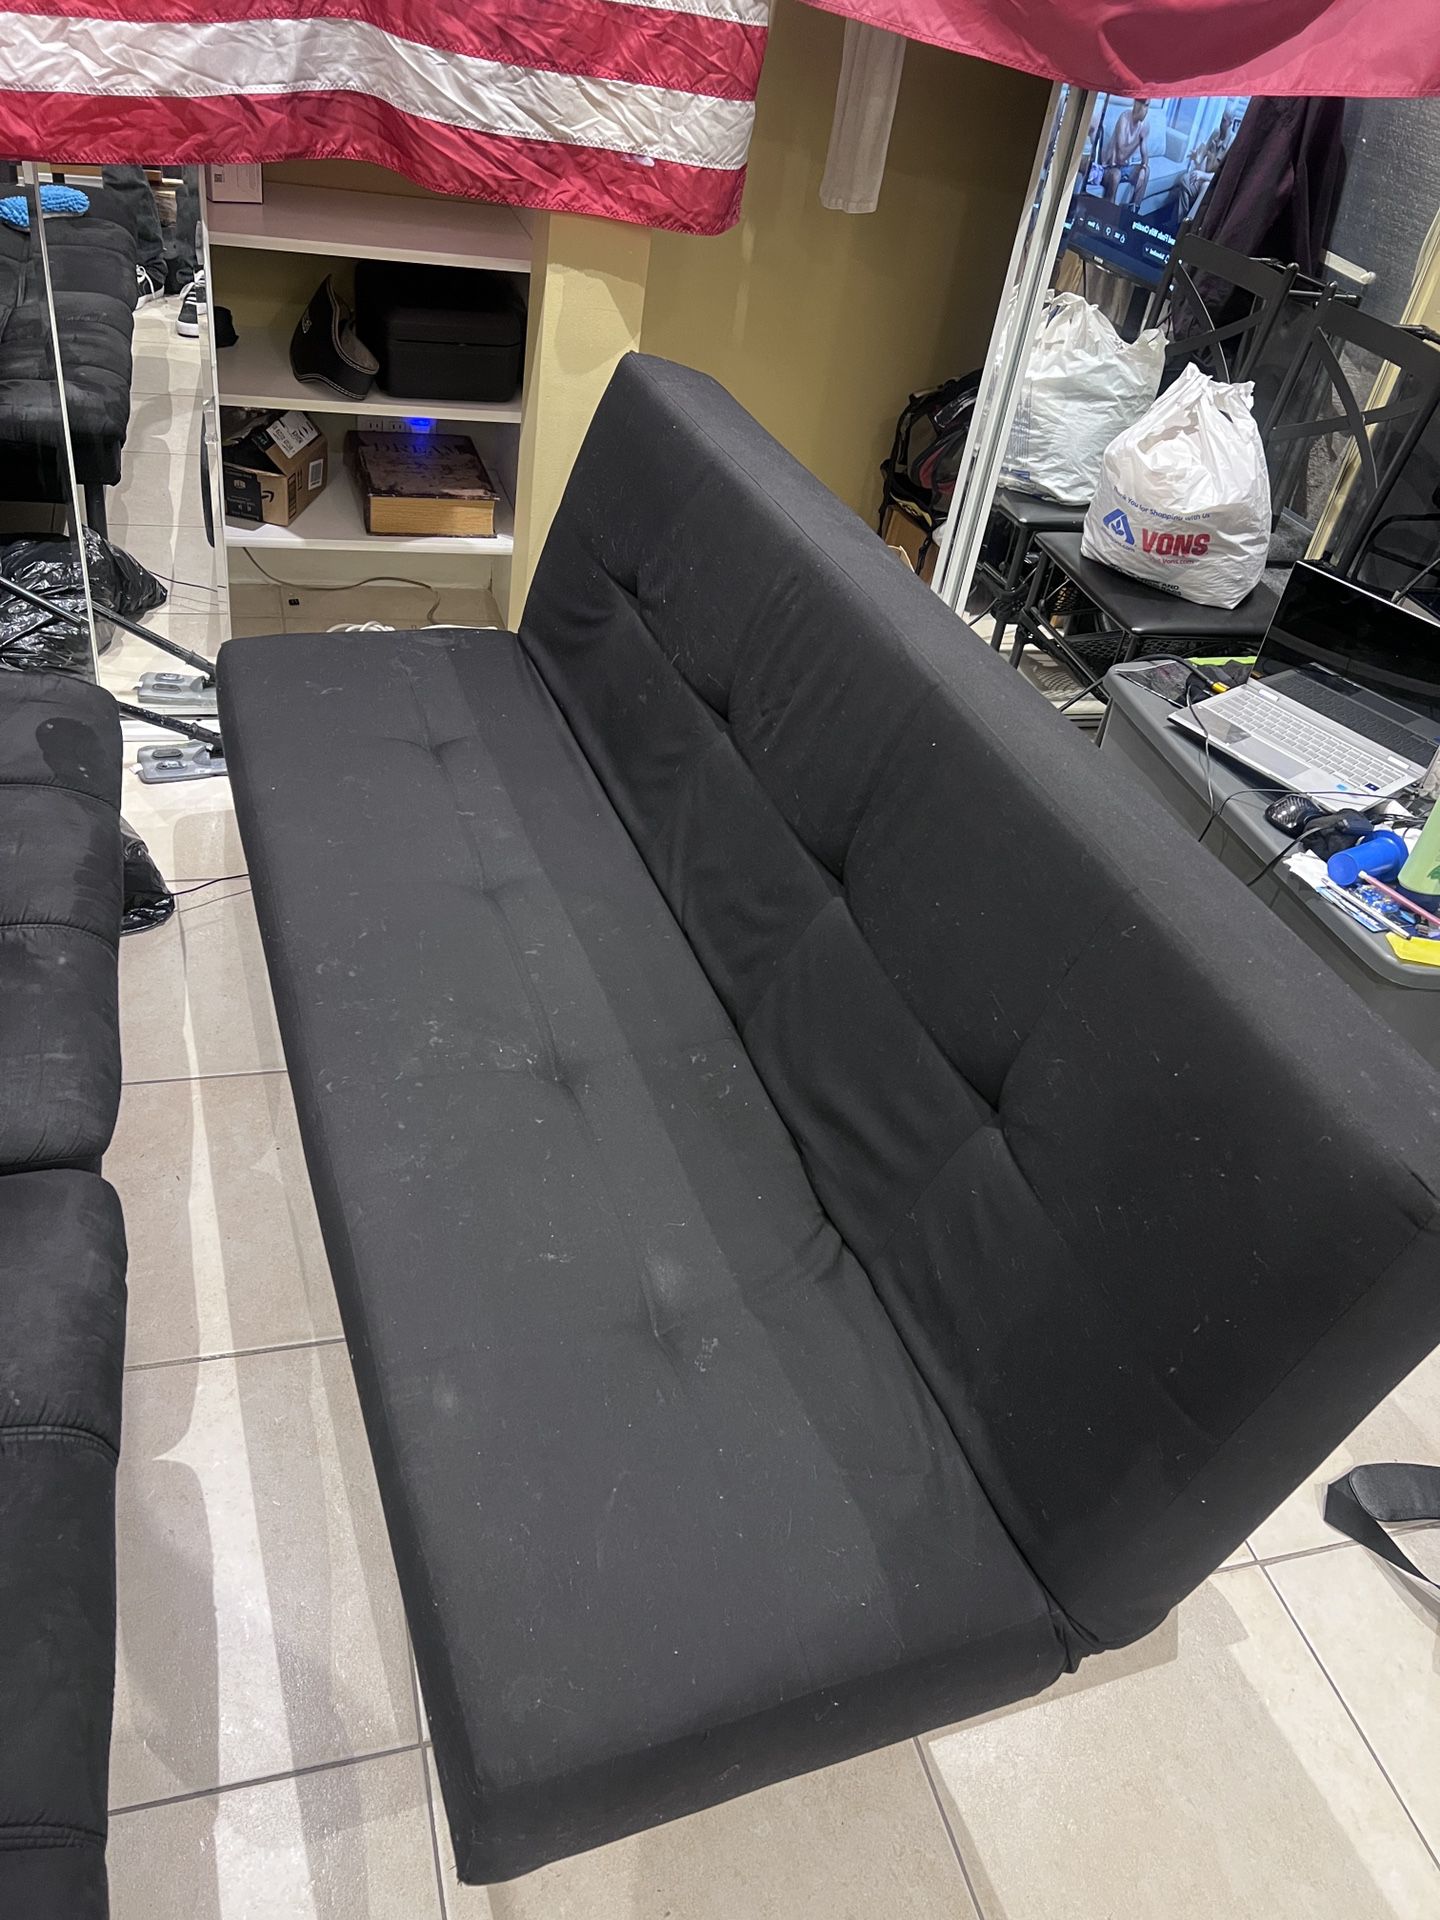 Langley Serta Futon Used 2 Times Only